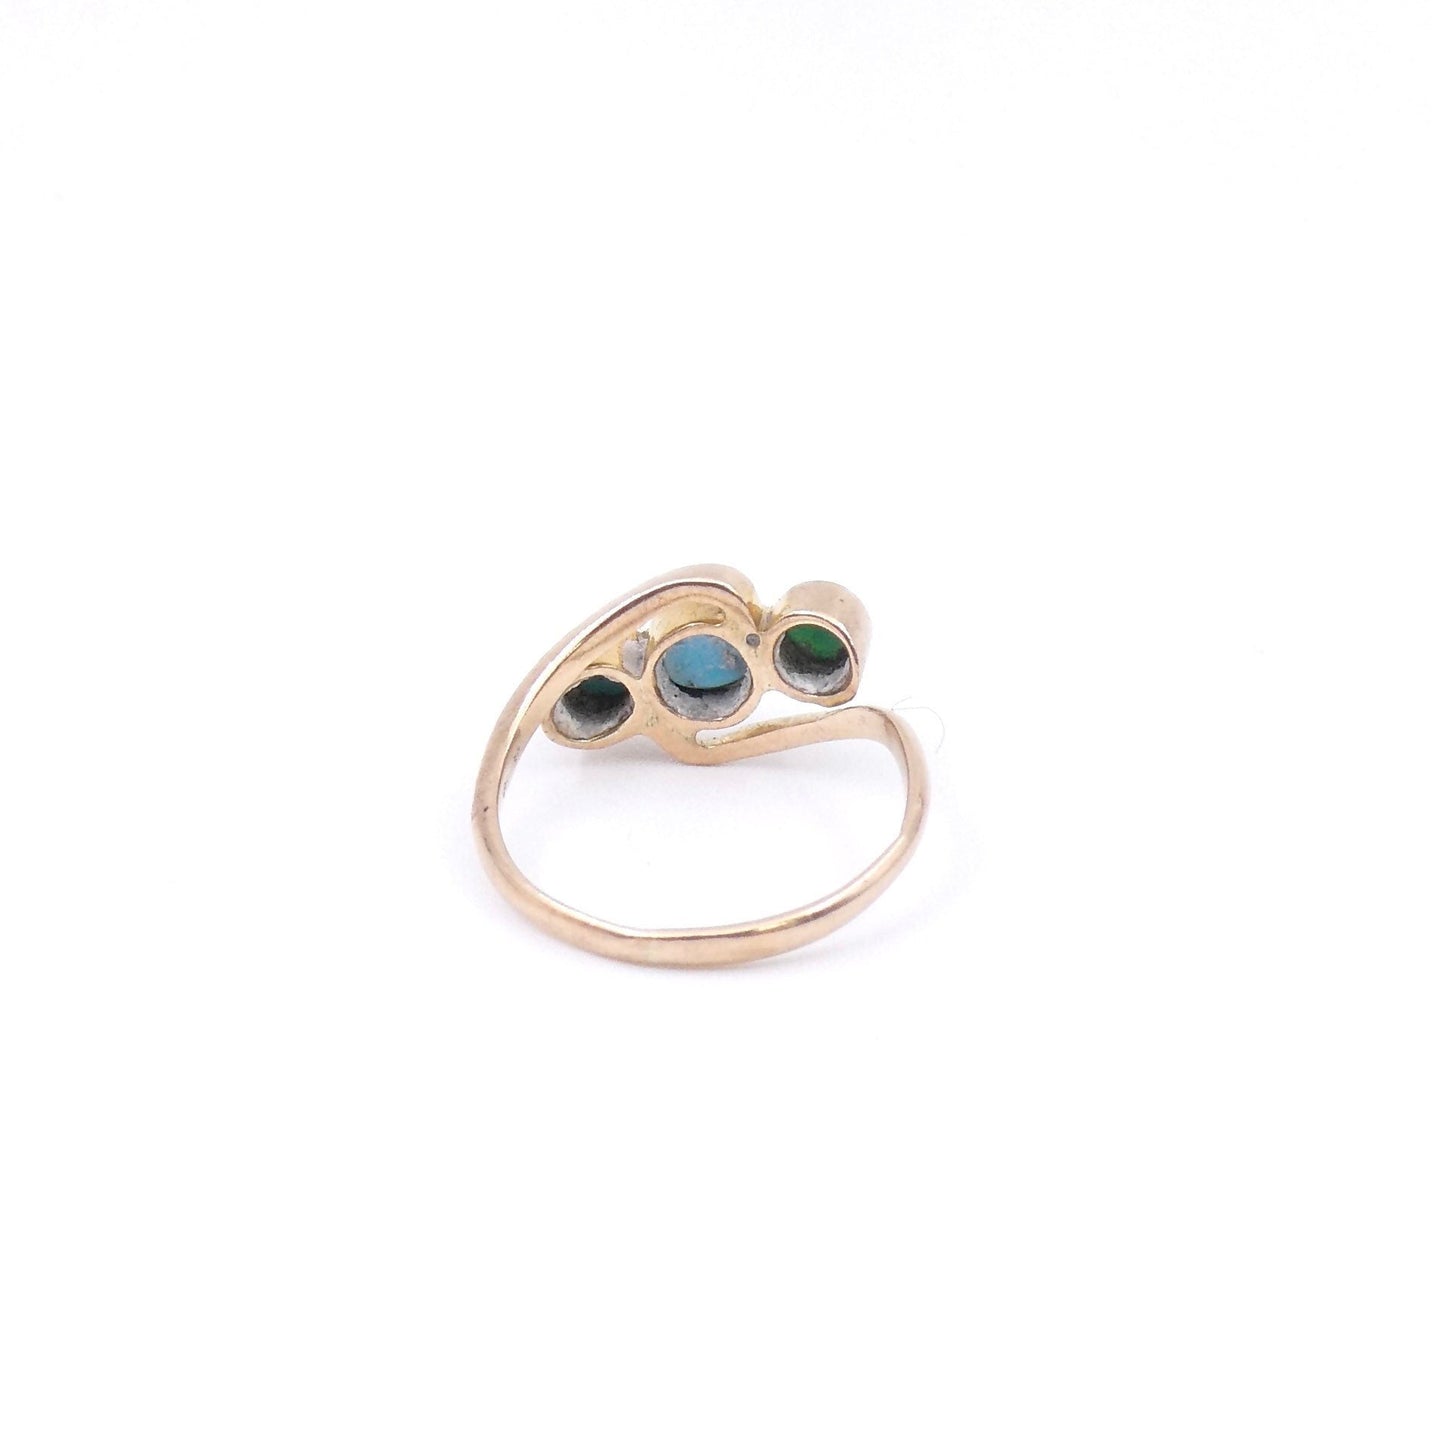 Three stone turquoise ring with a rose tone to the gold and a twist design, very small baby finger ring. - Collected